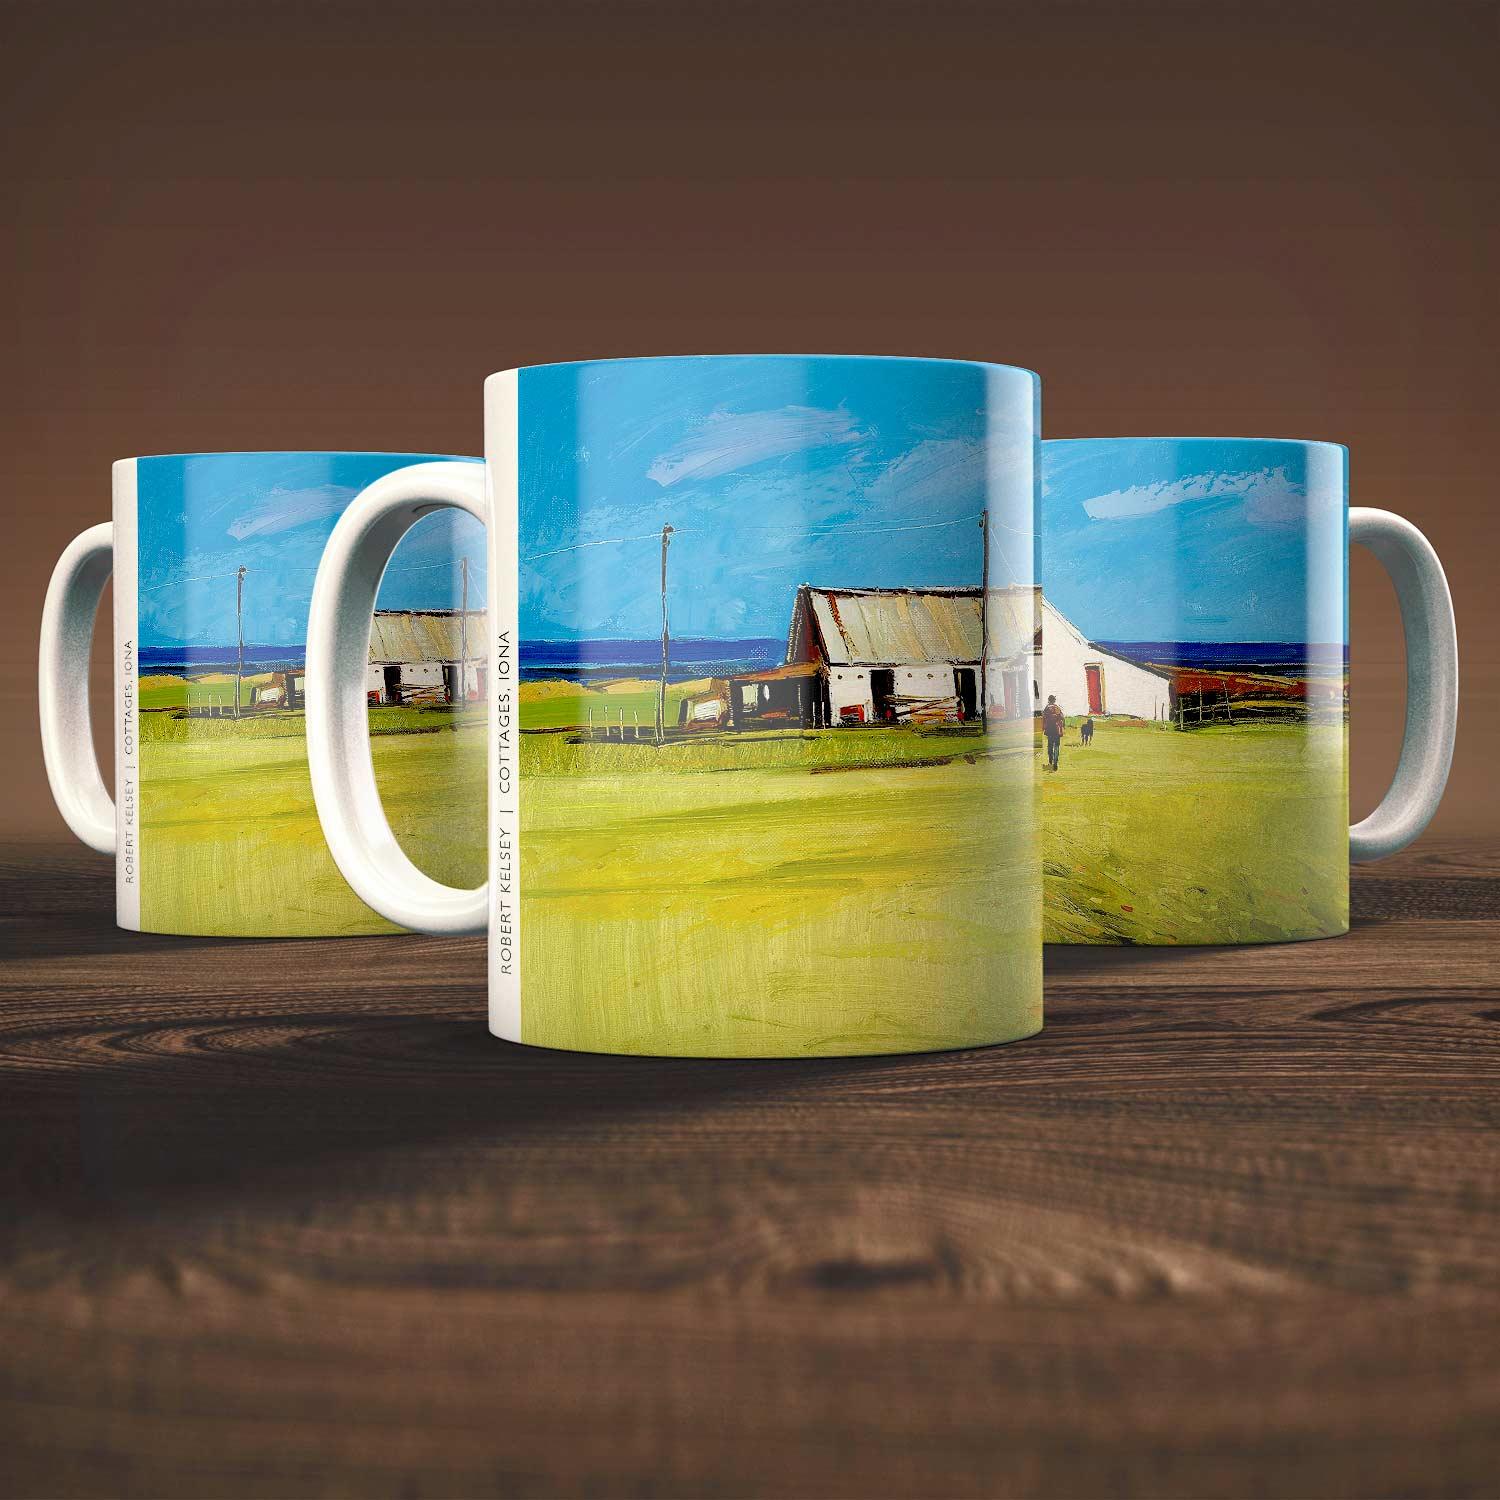 Cottages Iona Mug from an original painting by artist Robert Kelsey